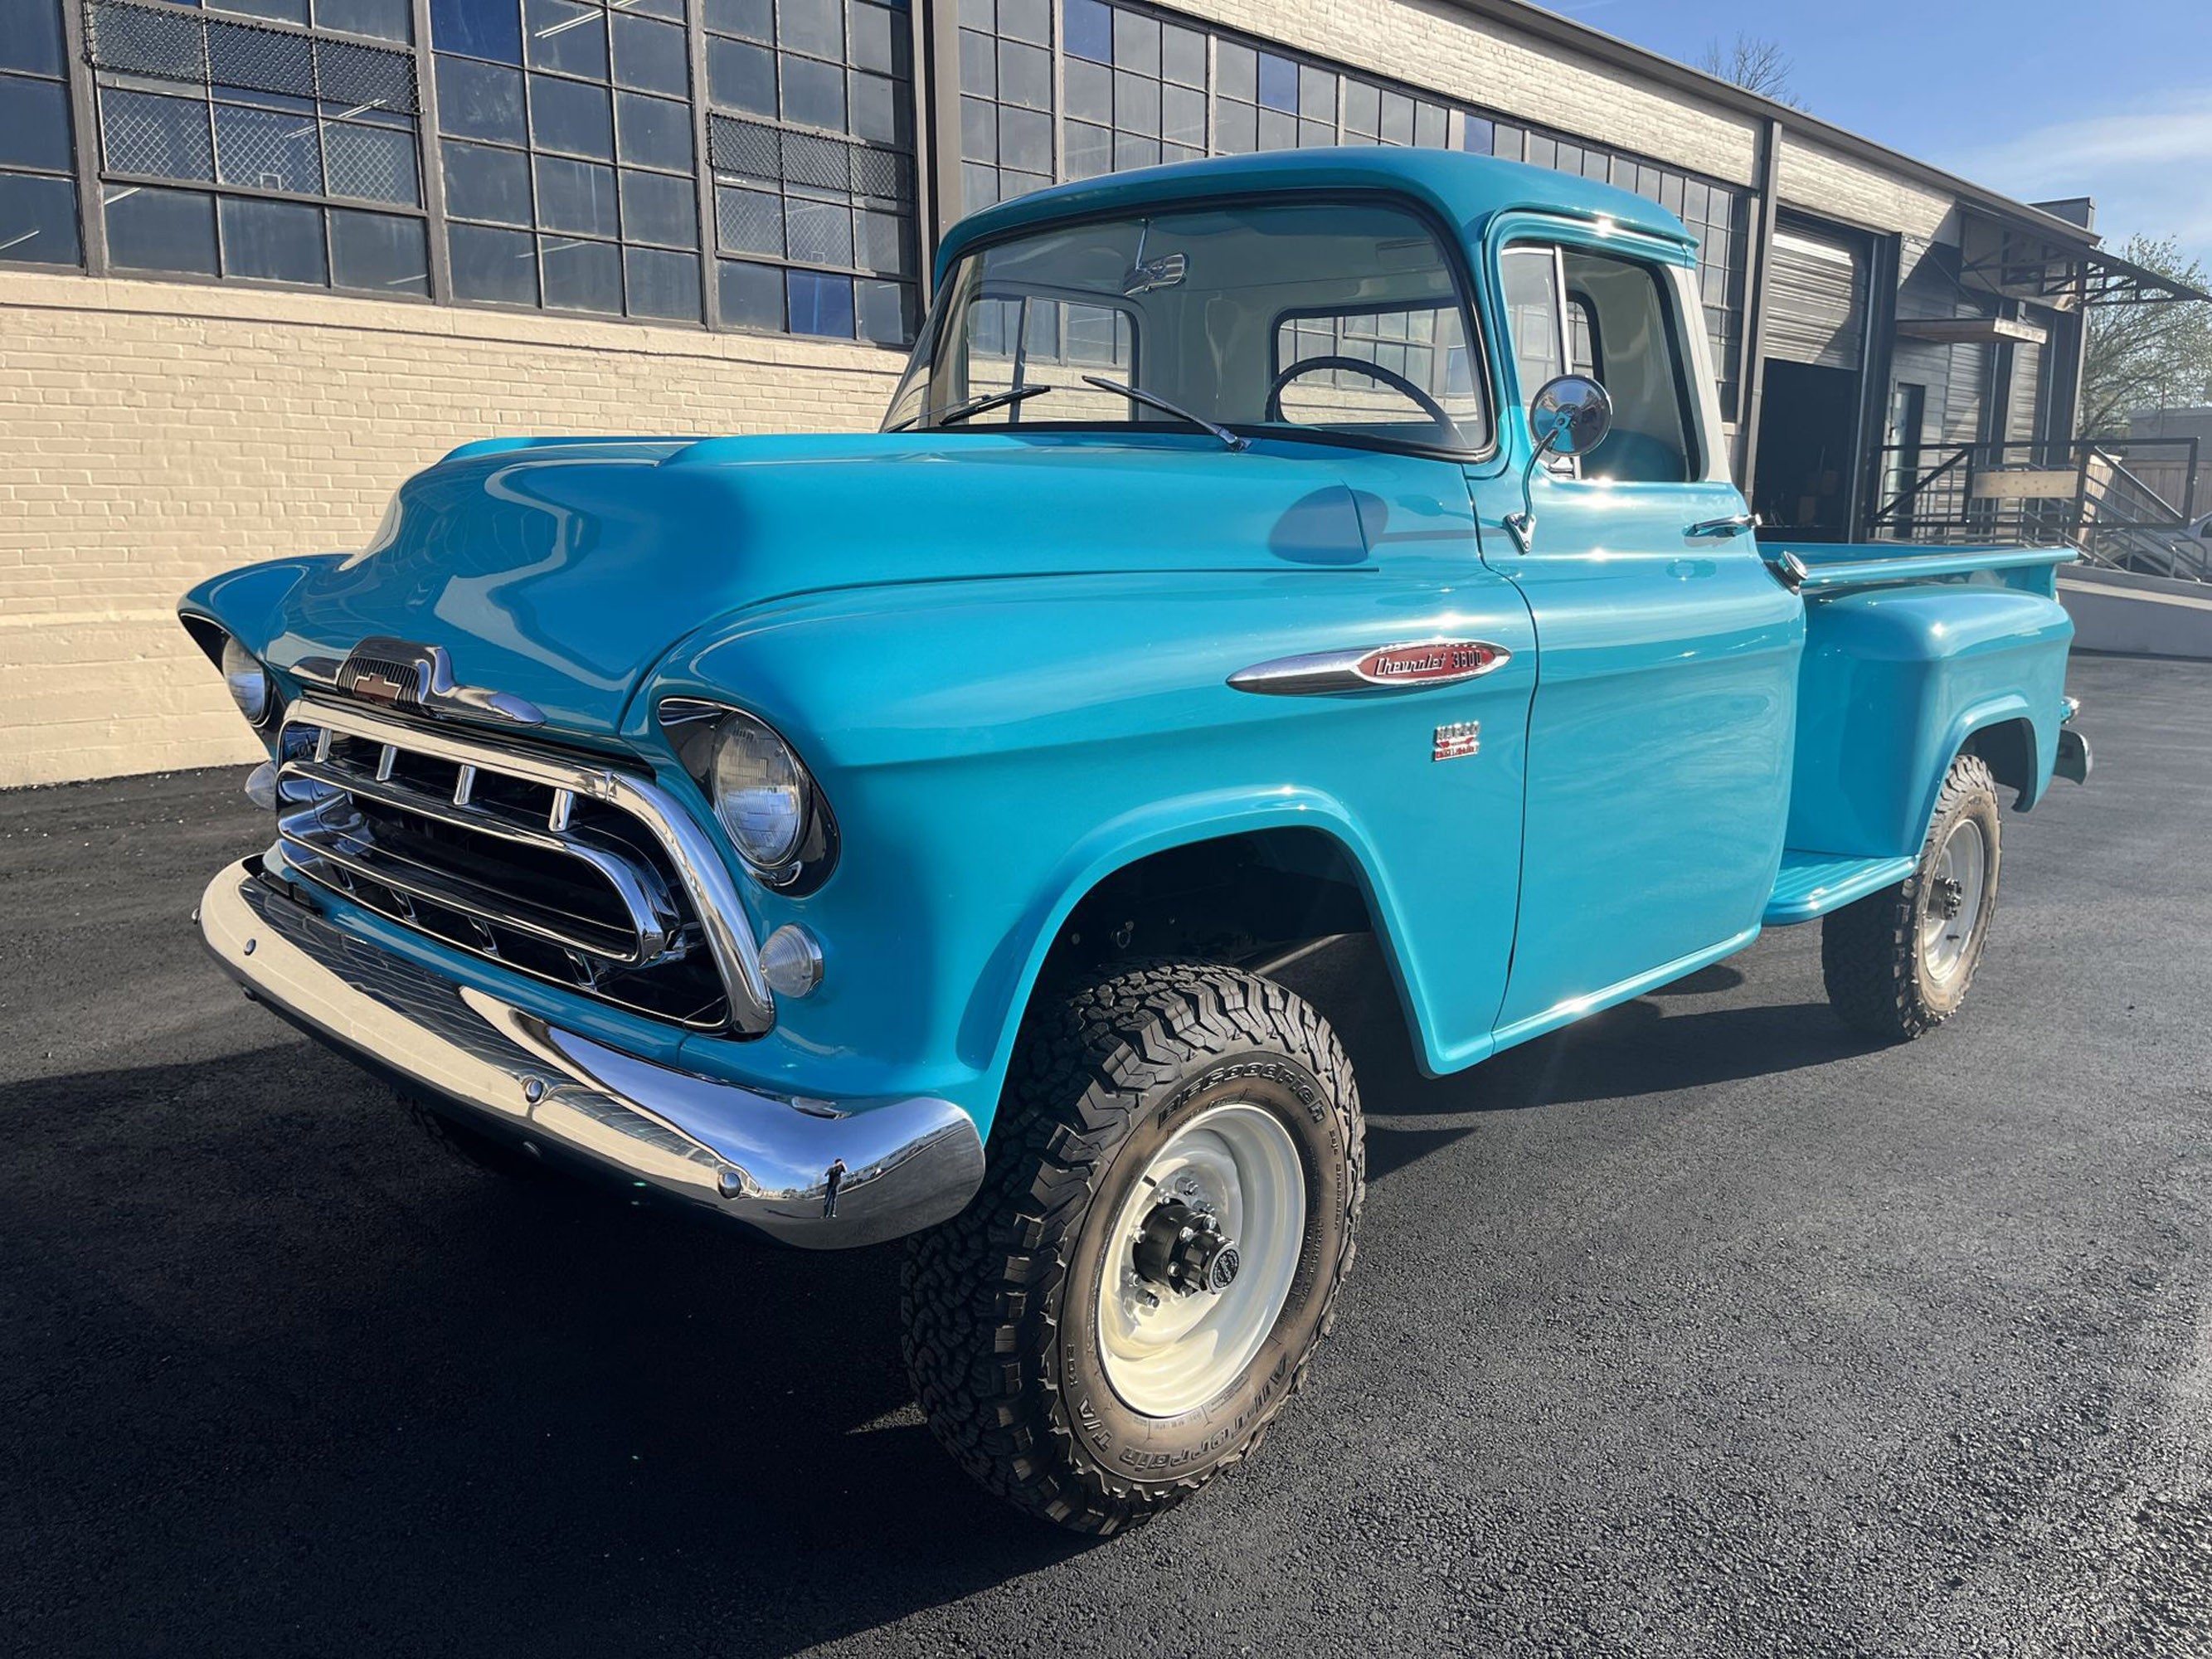 The New Owner Of This 1957 Chevrolet 3600 NAPCO Conversion Found The Perfection They Were After